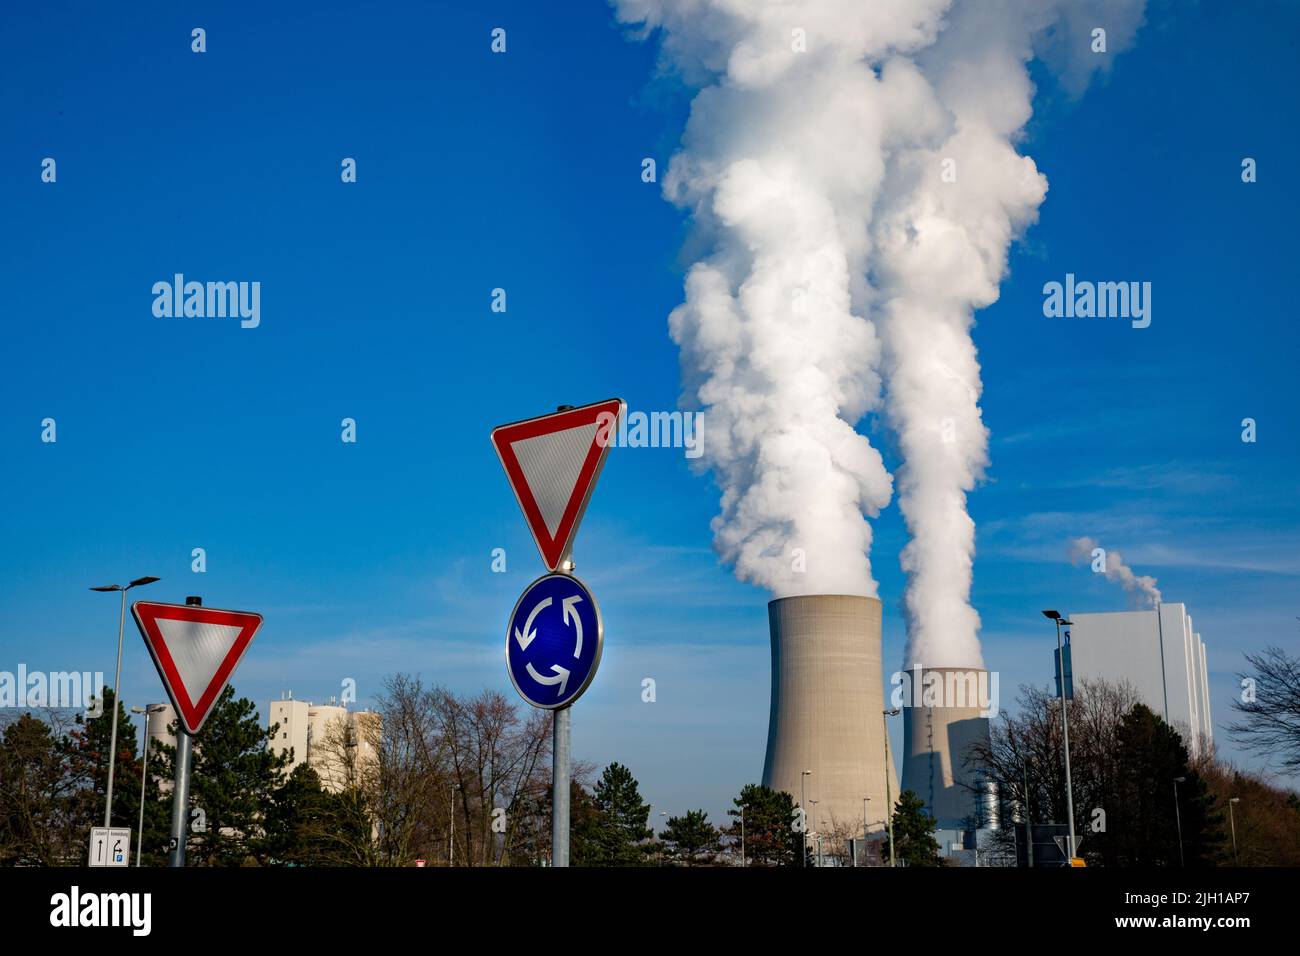 RWE Lignite-fired Power Plant Neurath In NRW. Coal-fired Power Plant With Traffic Signs Give Way And Traffic Circle In The Foreground. Stock Photo